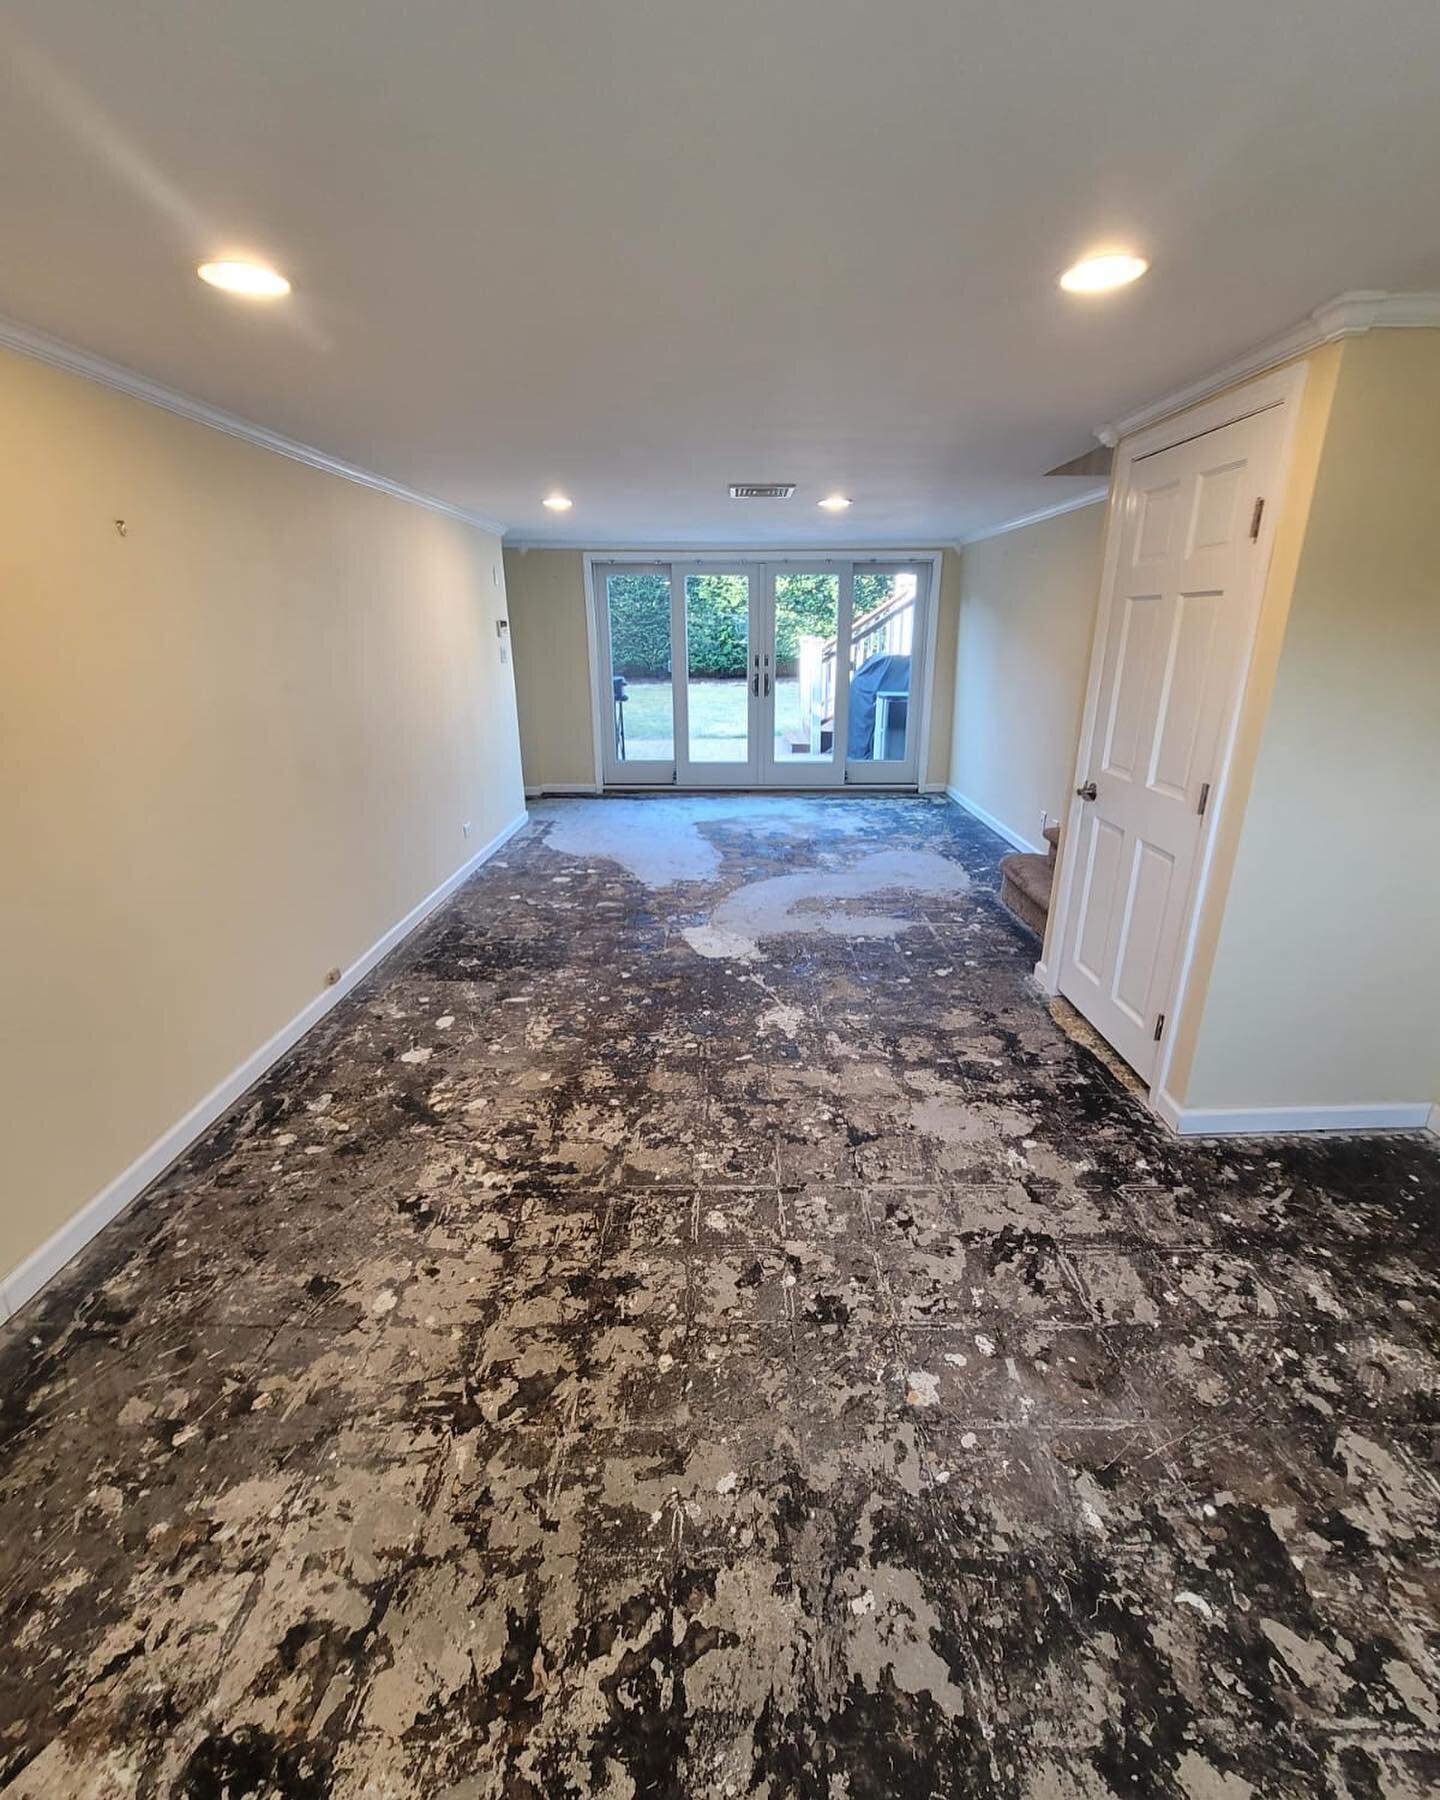 Swipe to see finished product. New tile floor and base molding in farmingdale. Going from carpet to tile really upgrades the space, especially with heated floors.
#farmingdale #renovation #homerenovation #tile #longislandrenovation #longislandcontrac